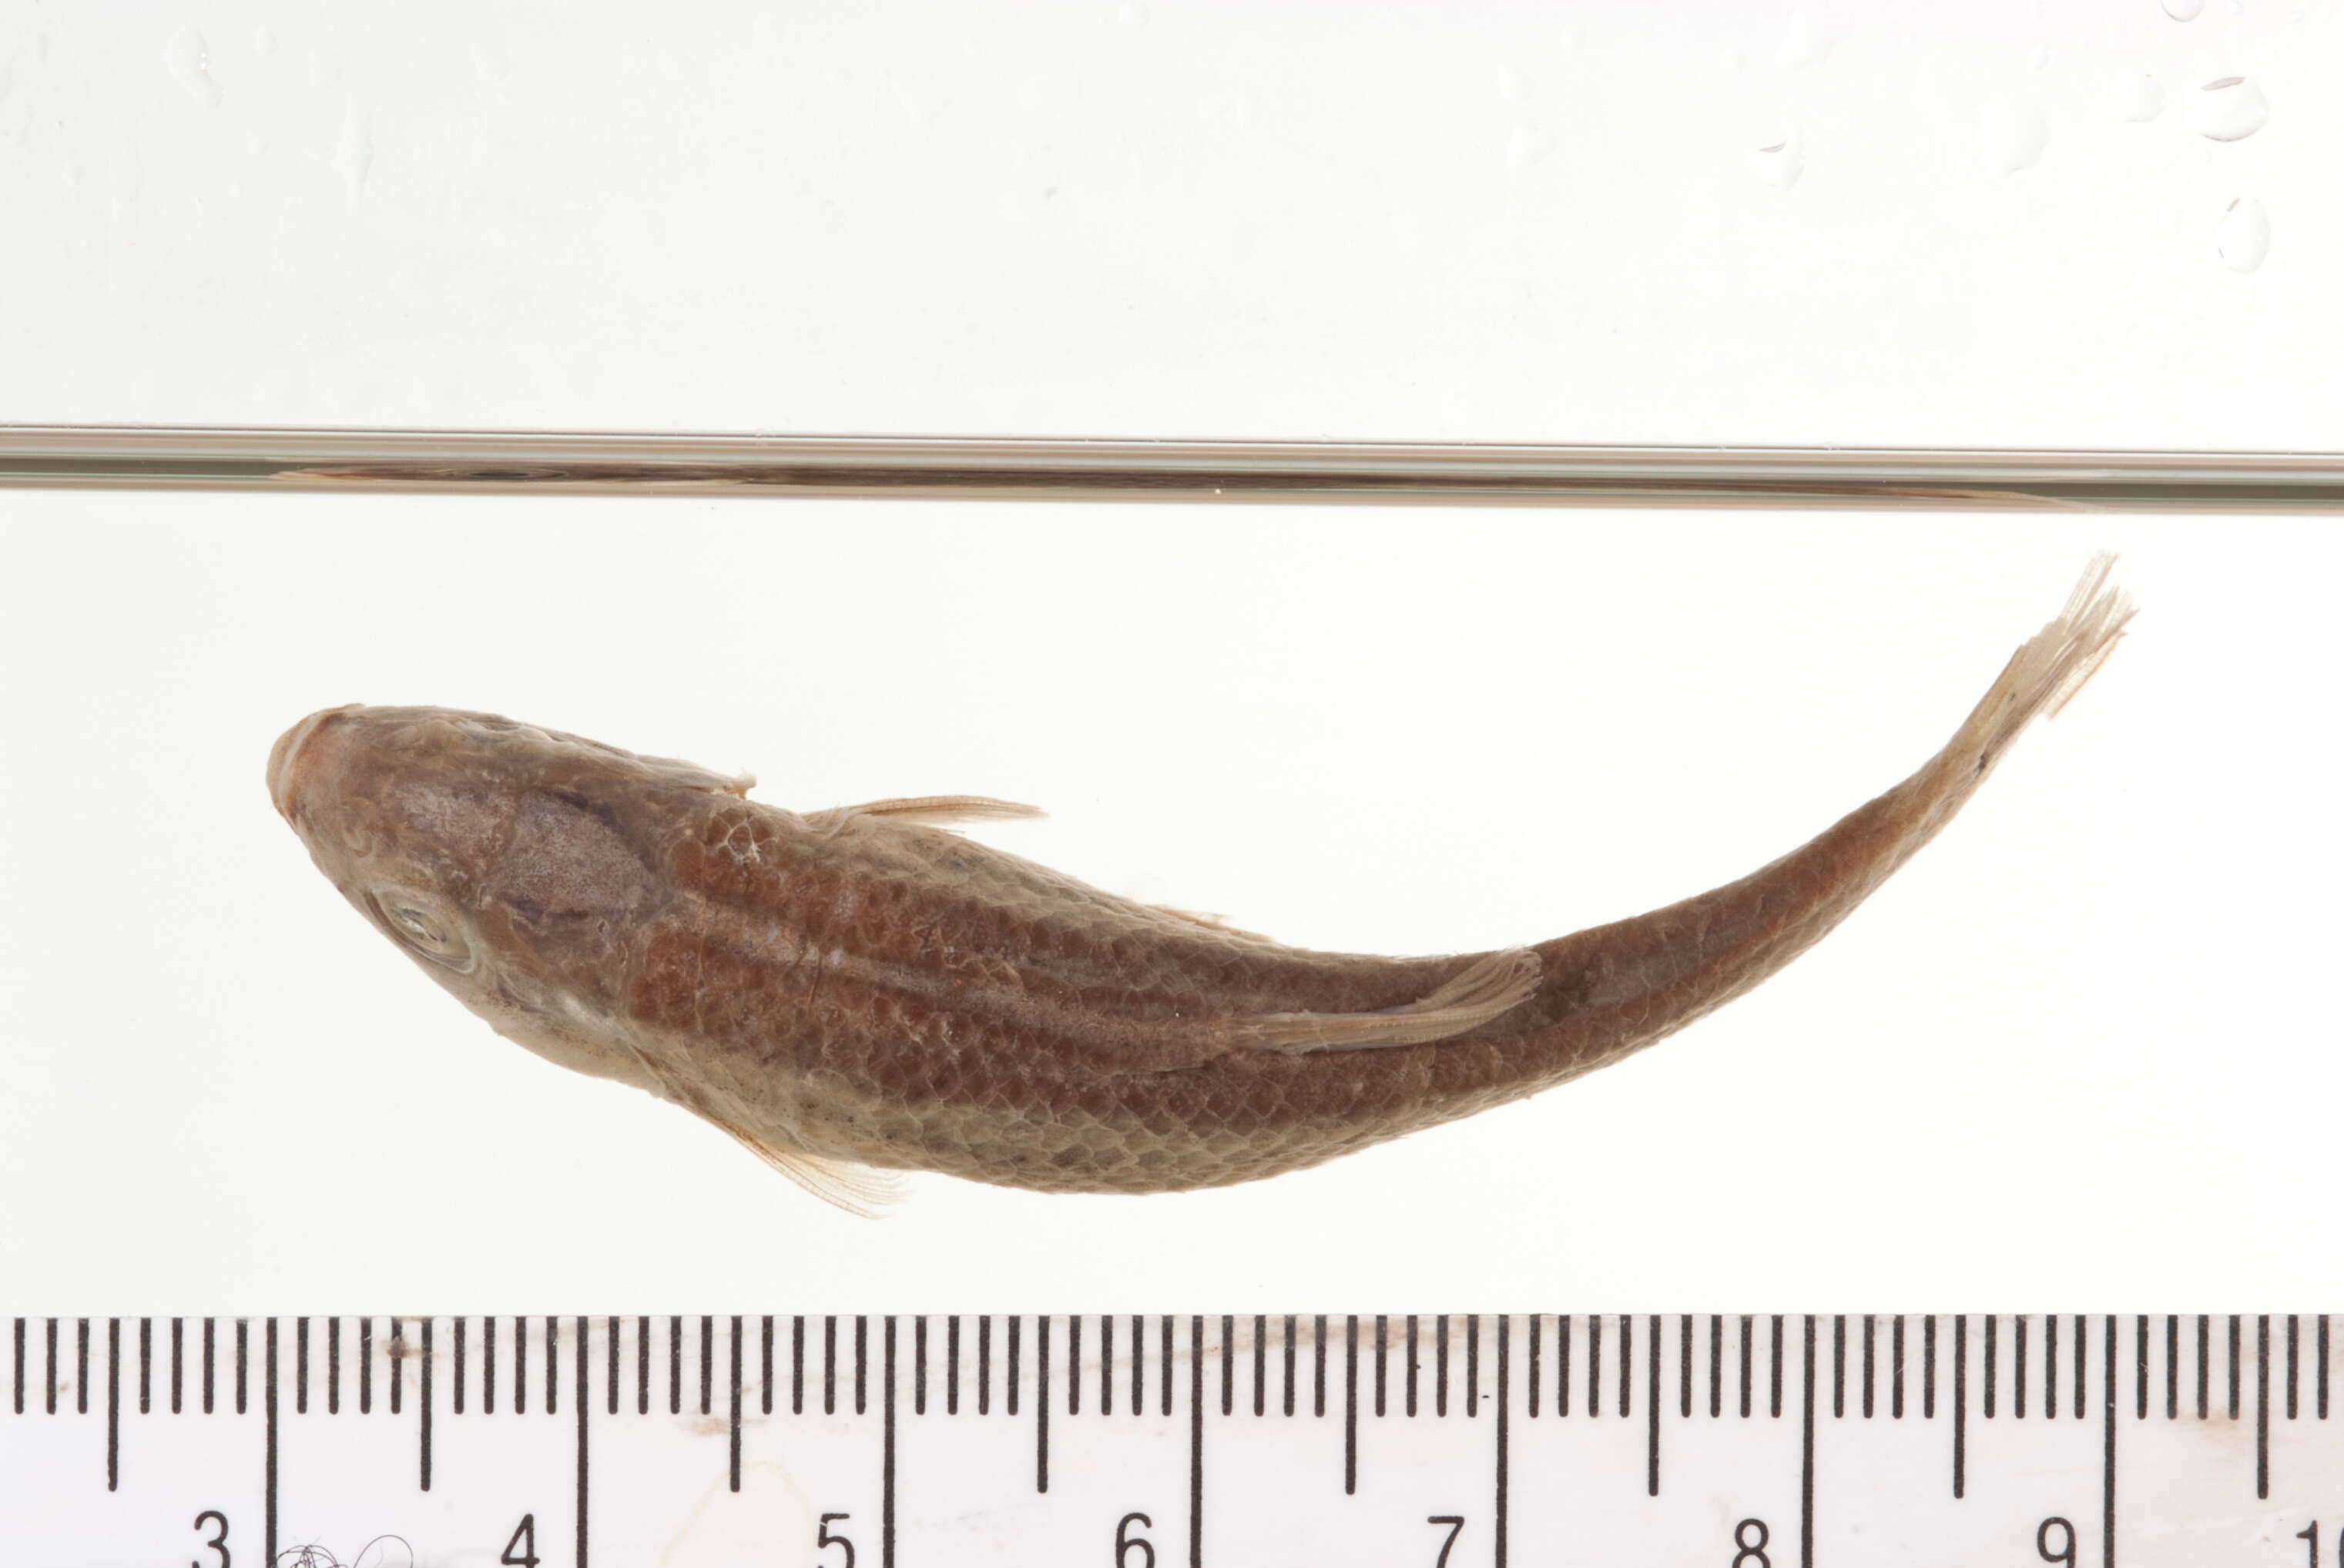 Image of Manantial roundnose minnow